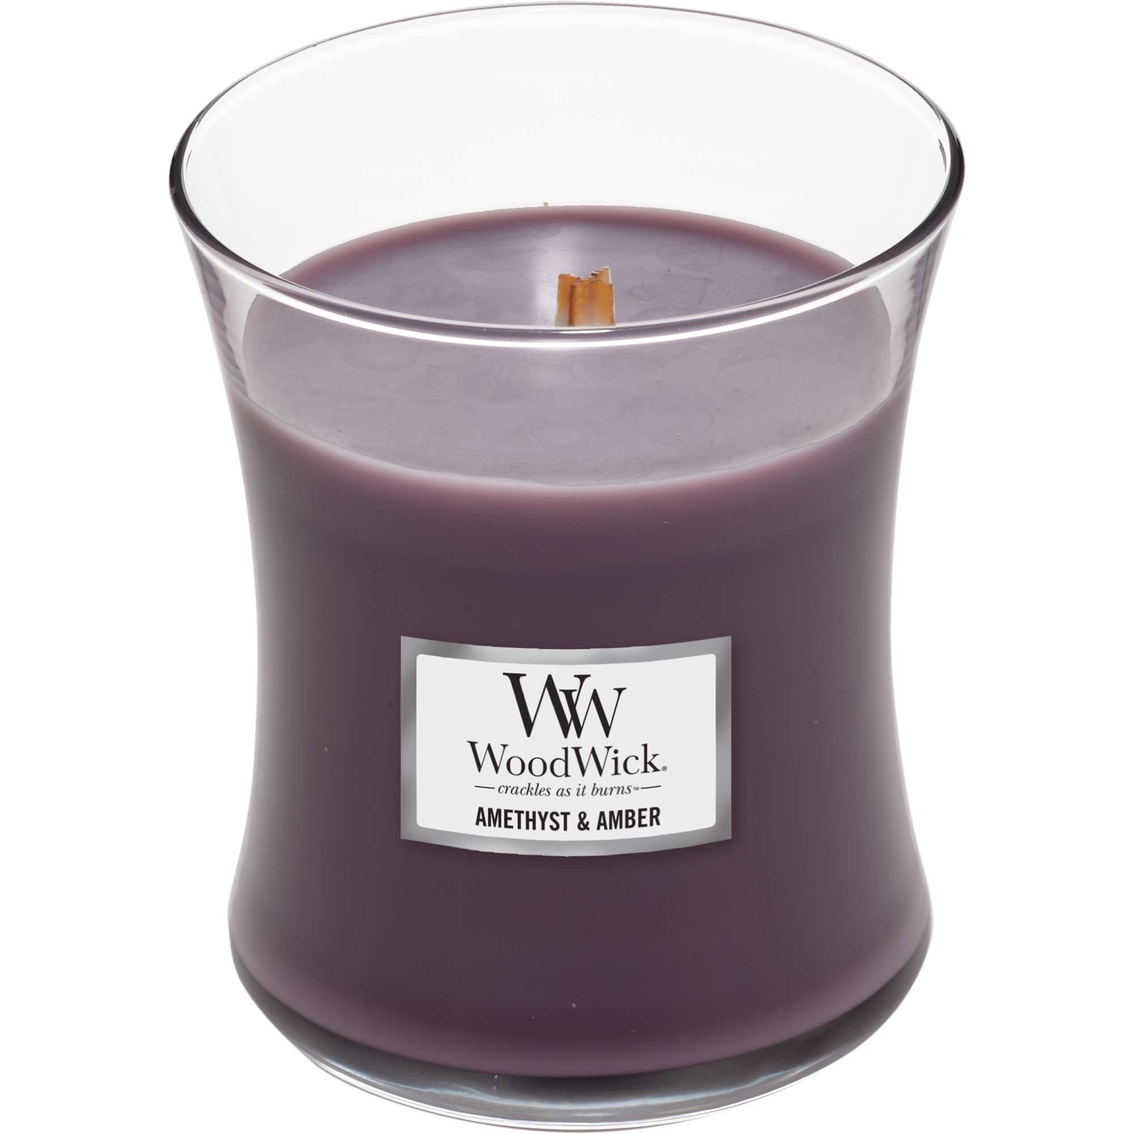 WoodWick Amethyst & Amber Medium Hourglass Candle - Image 2 of 2